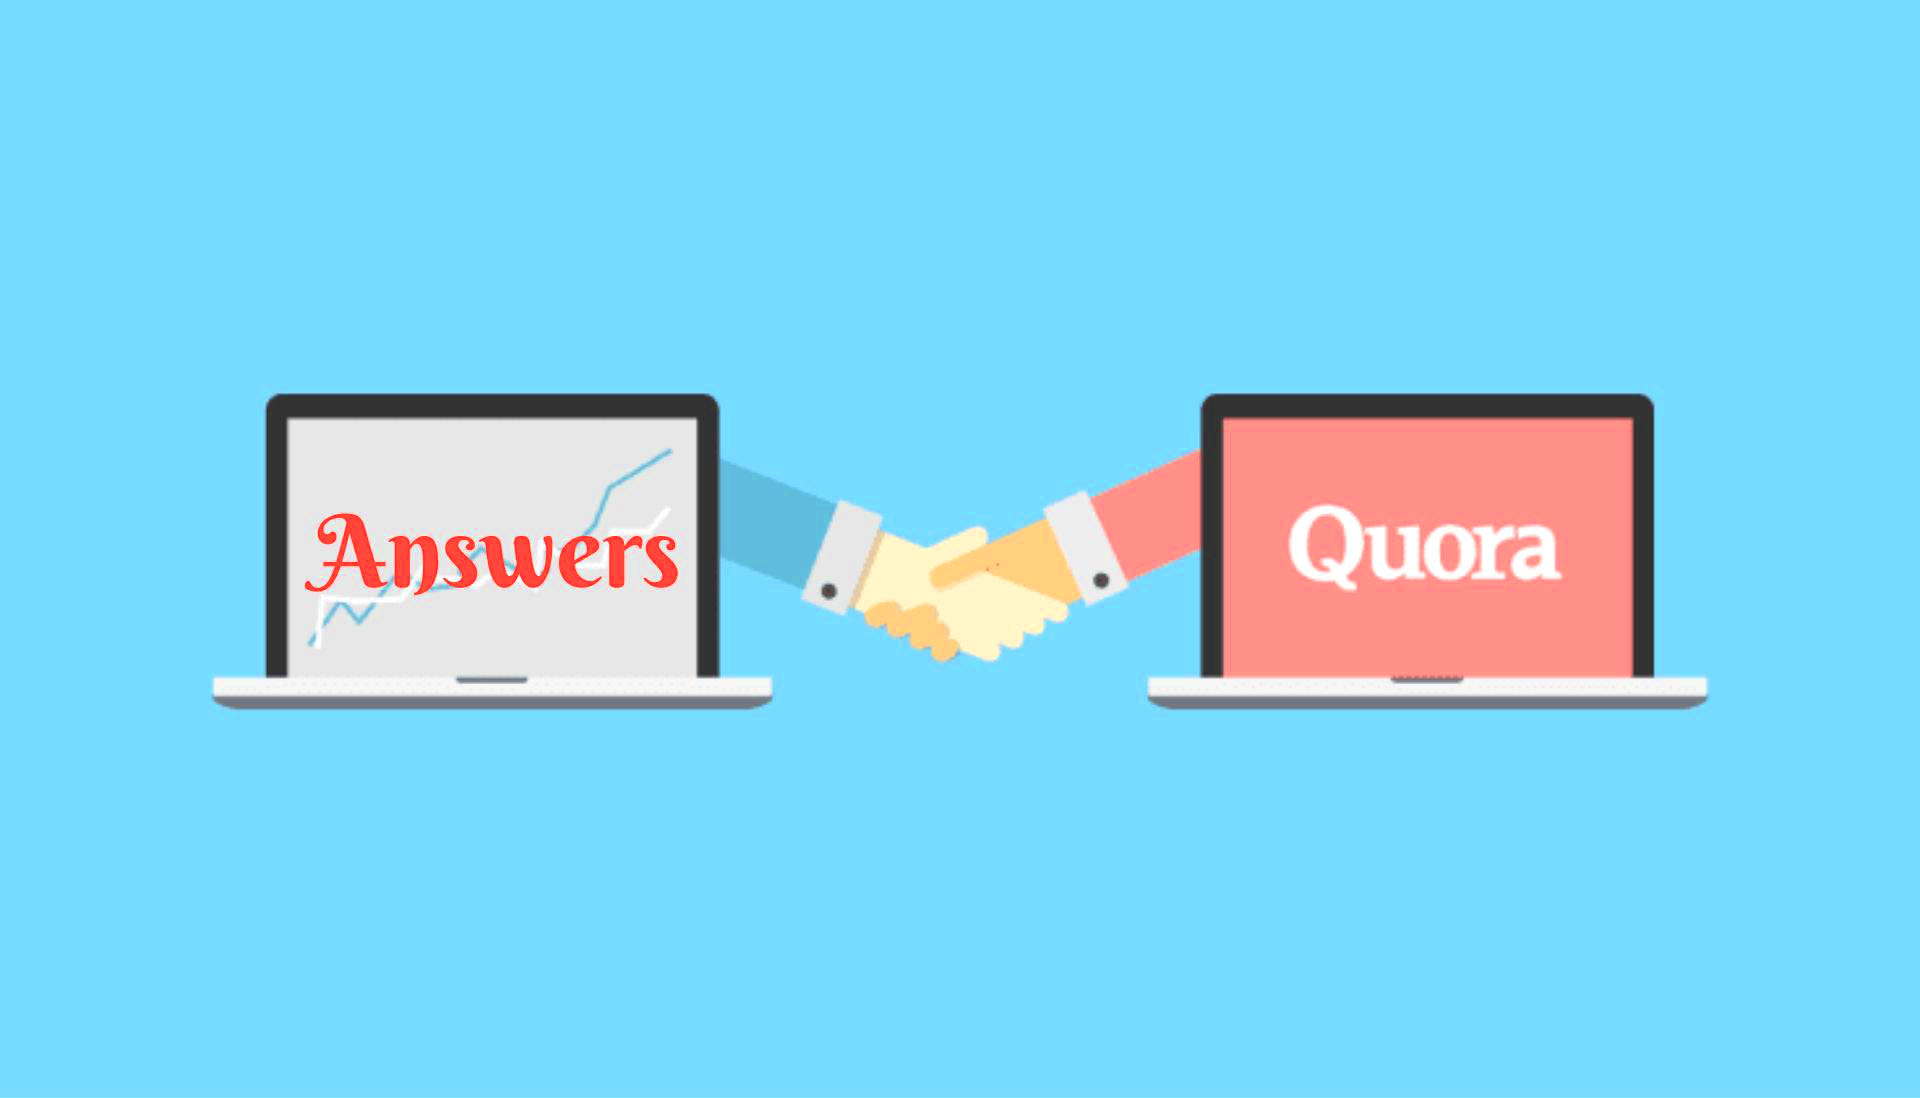 Manually promote your website 5 high quality Quora Answers